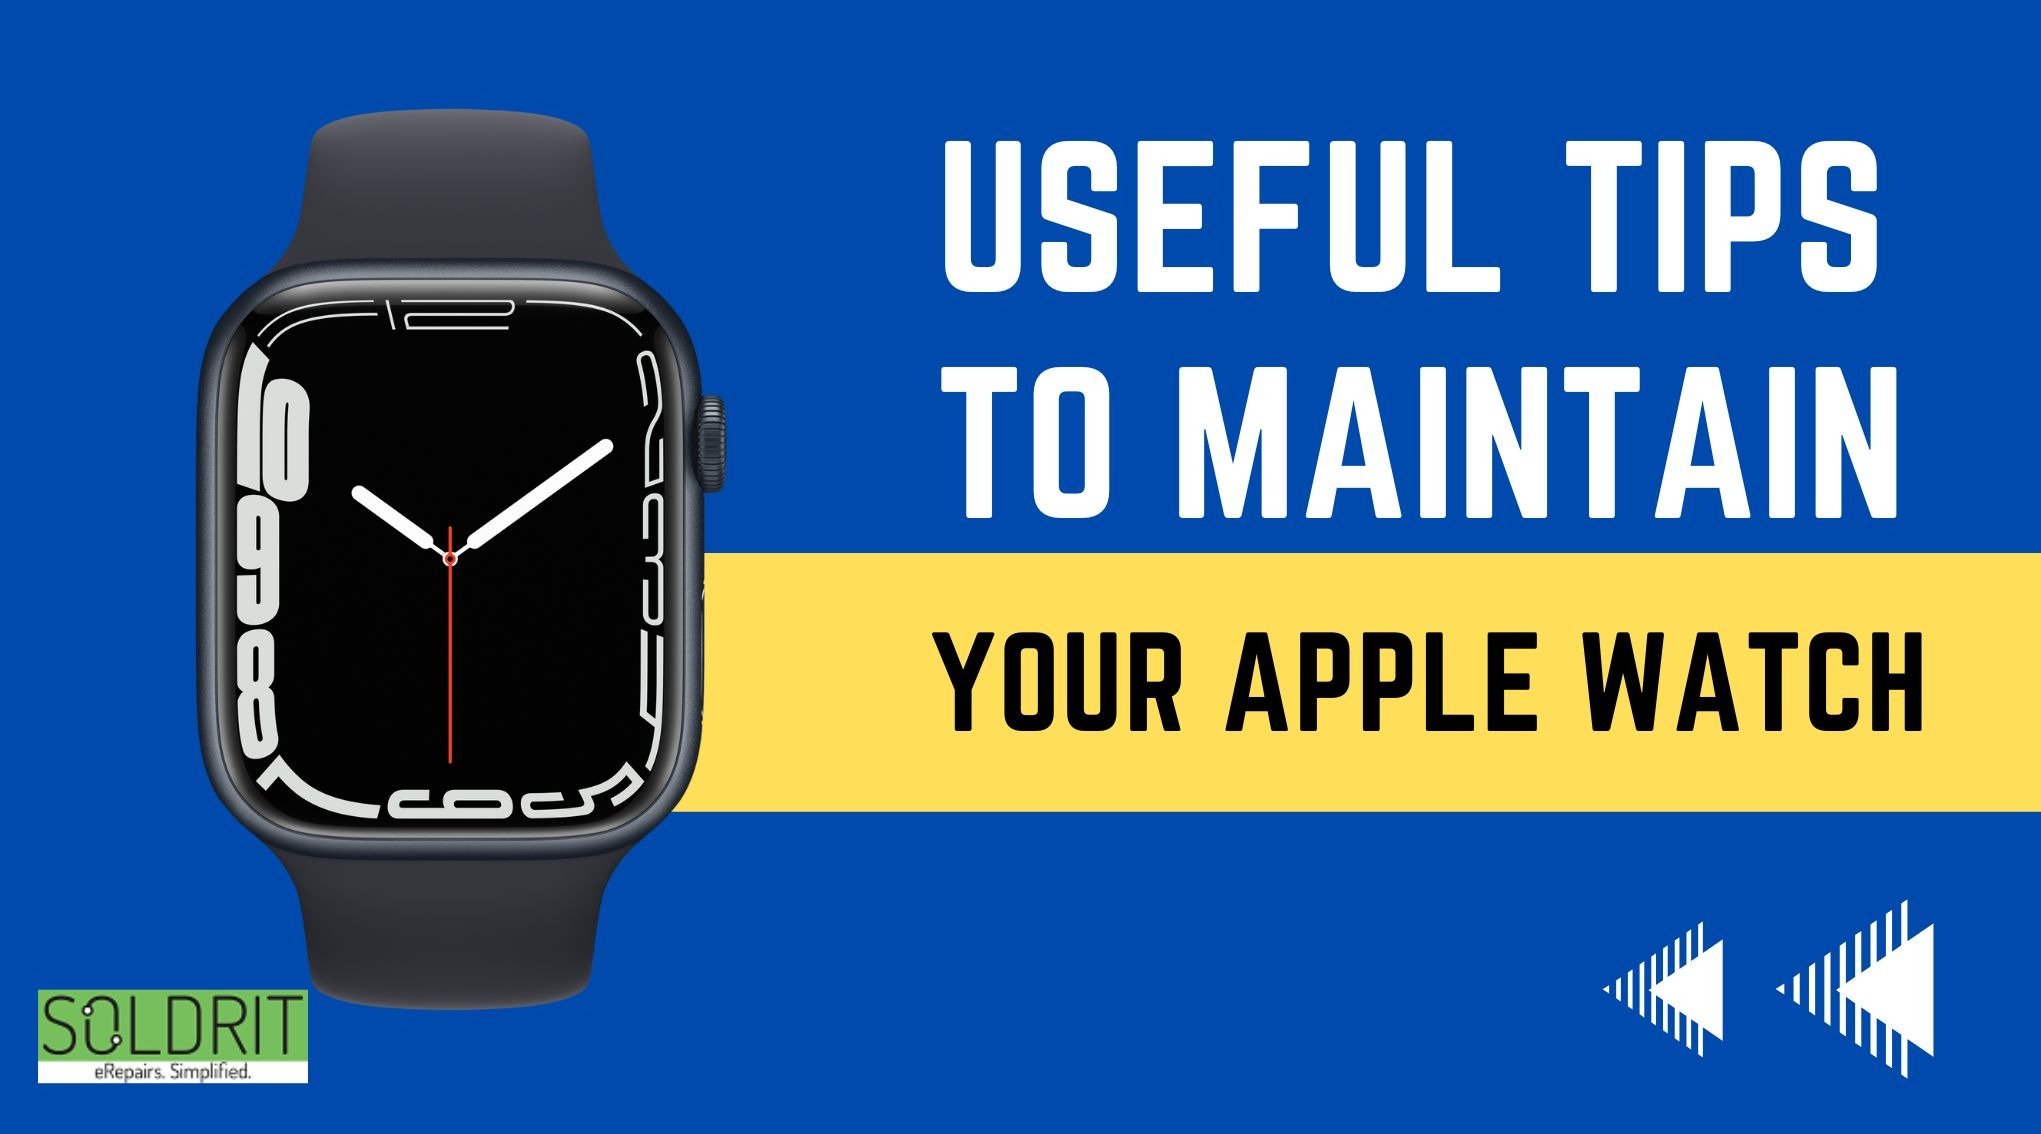 Useful Tips to maintain your Apple iWatch